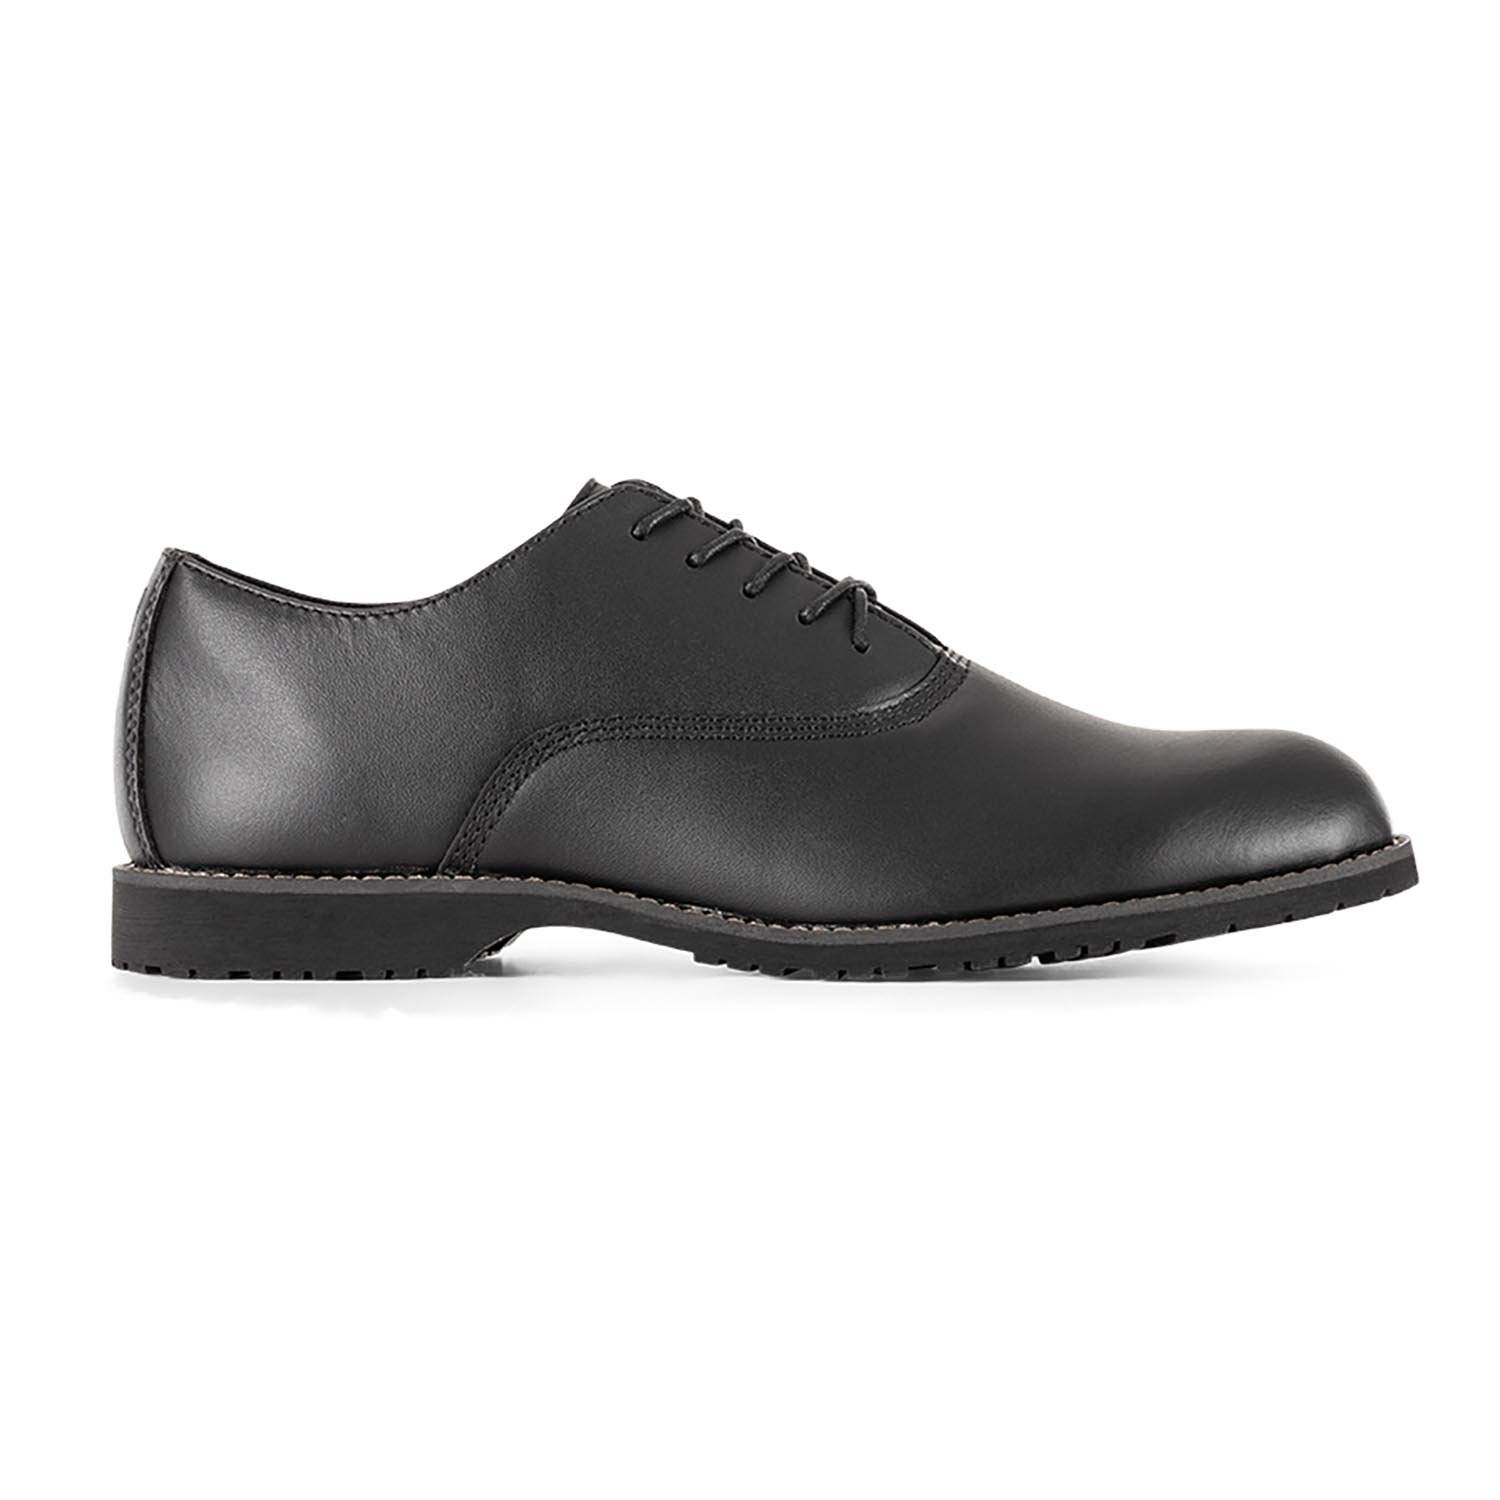 5.11 Tactical Duty Oxford